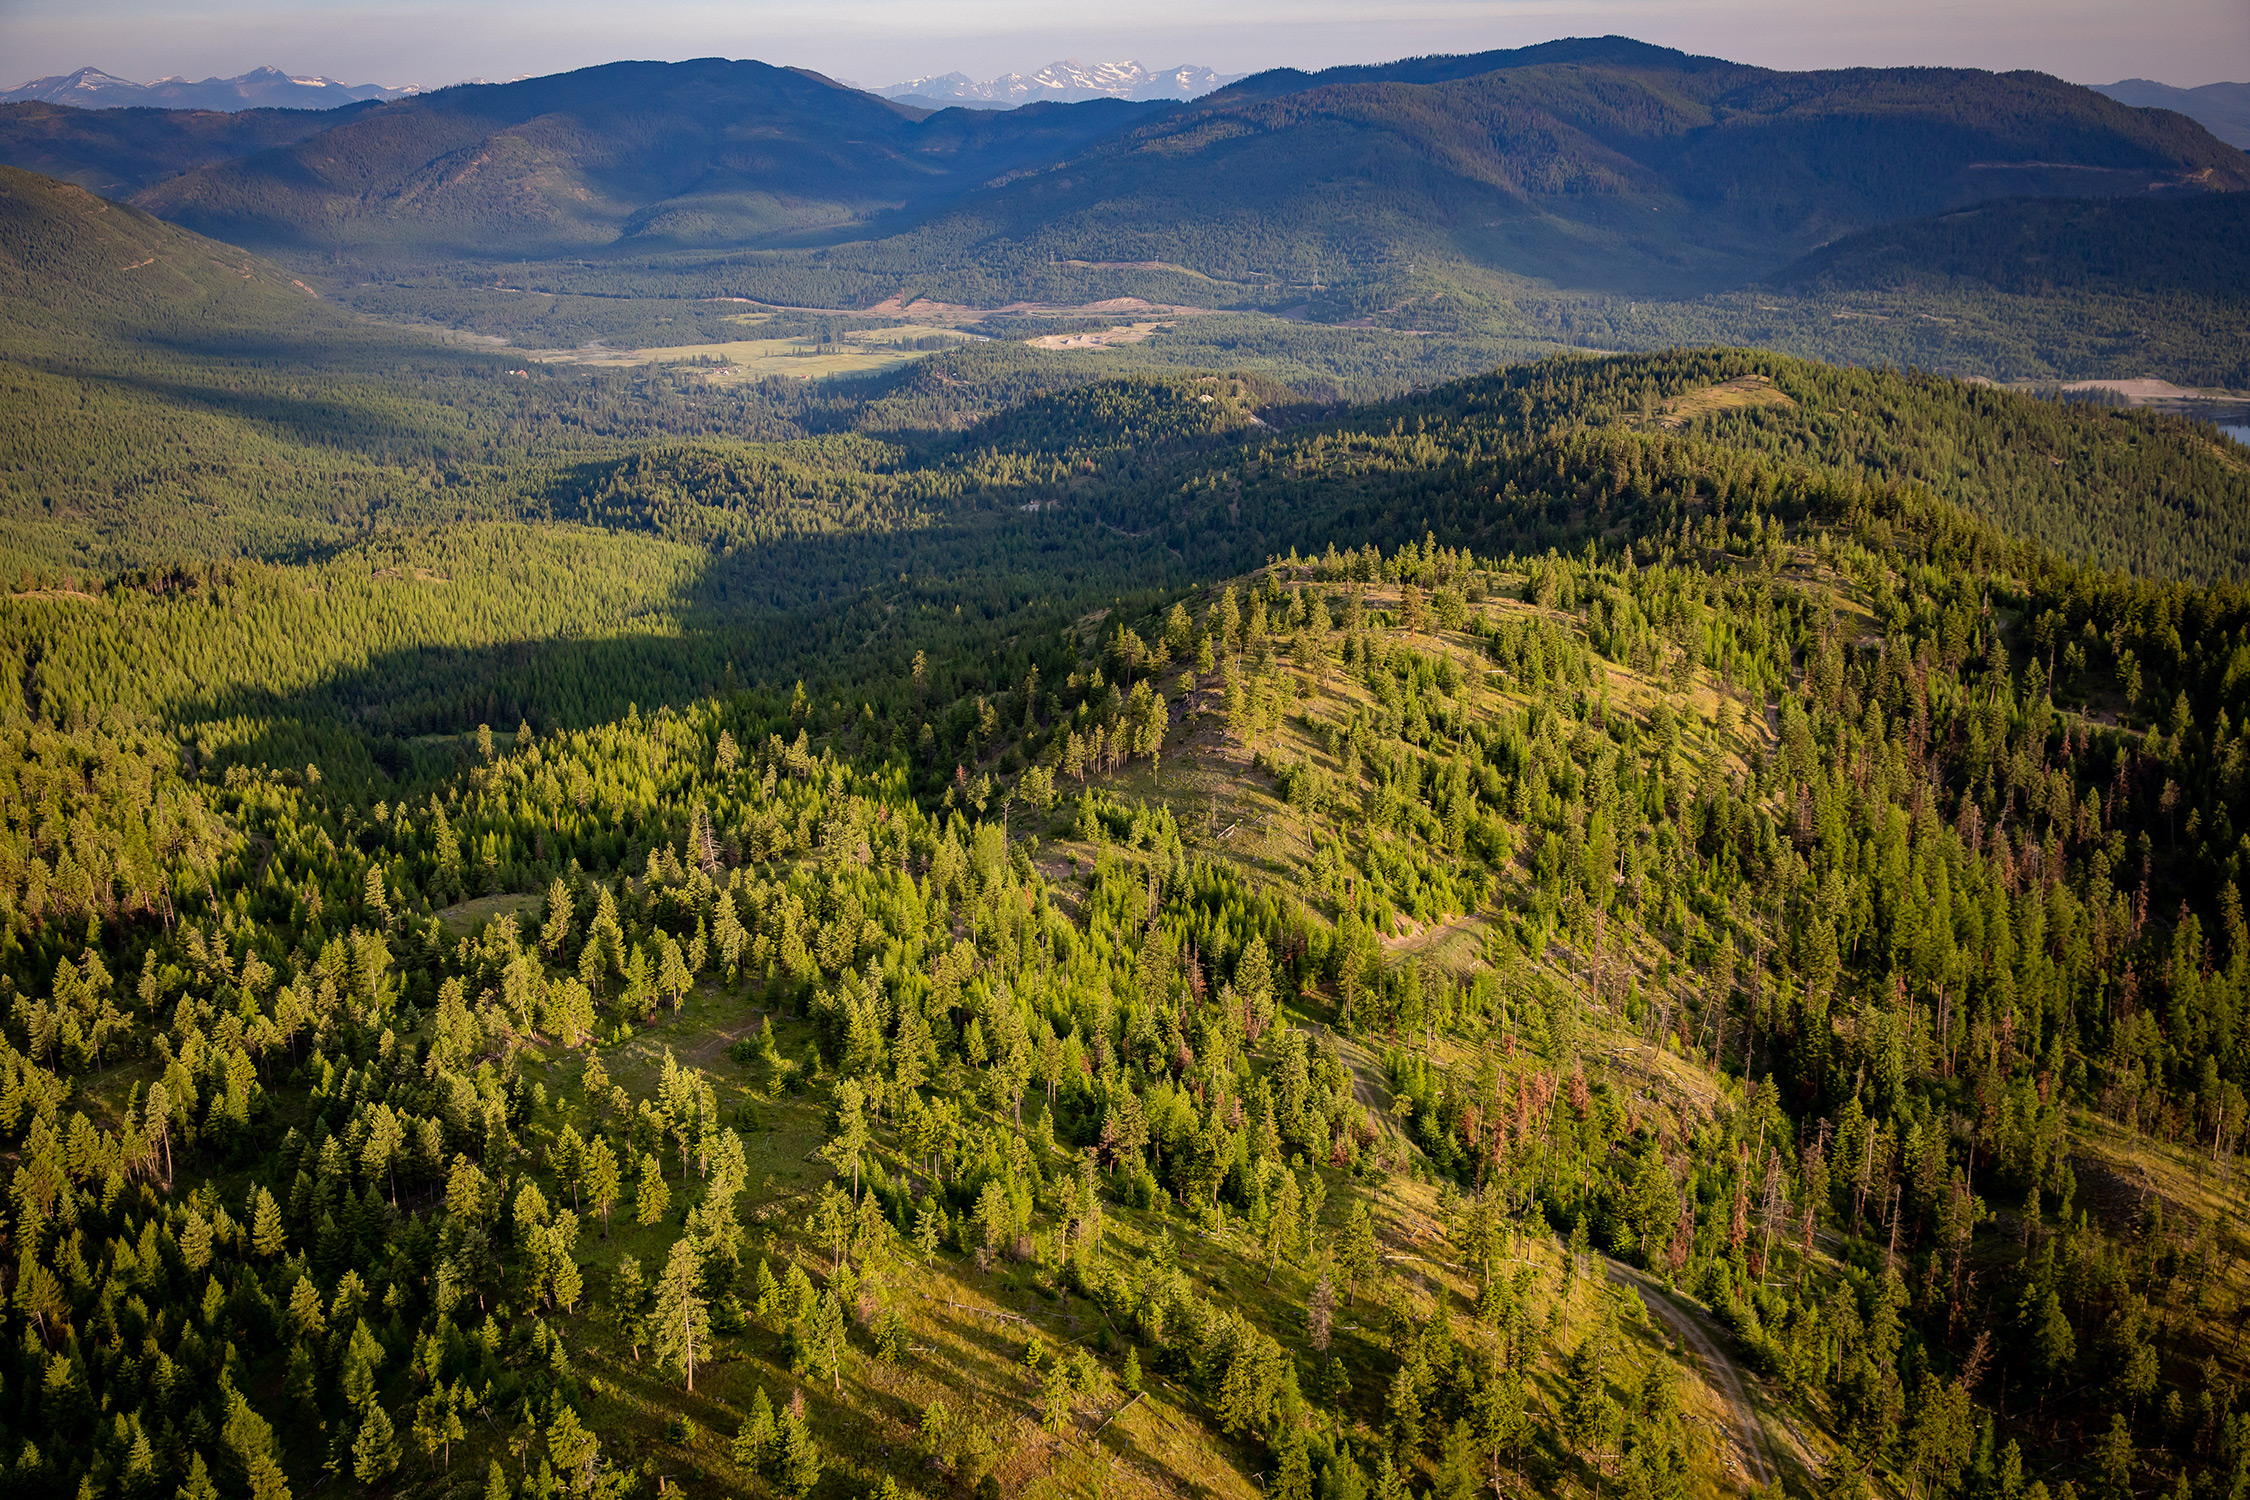 An aerial view of tree-covered mountains in Montana